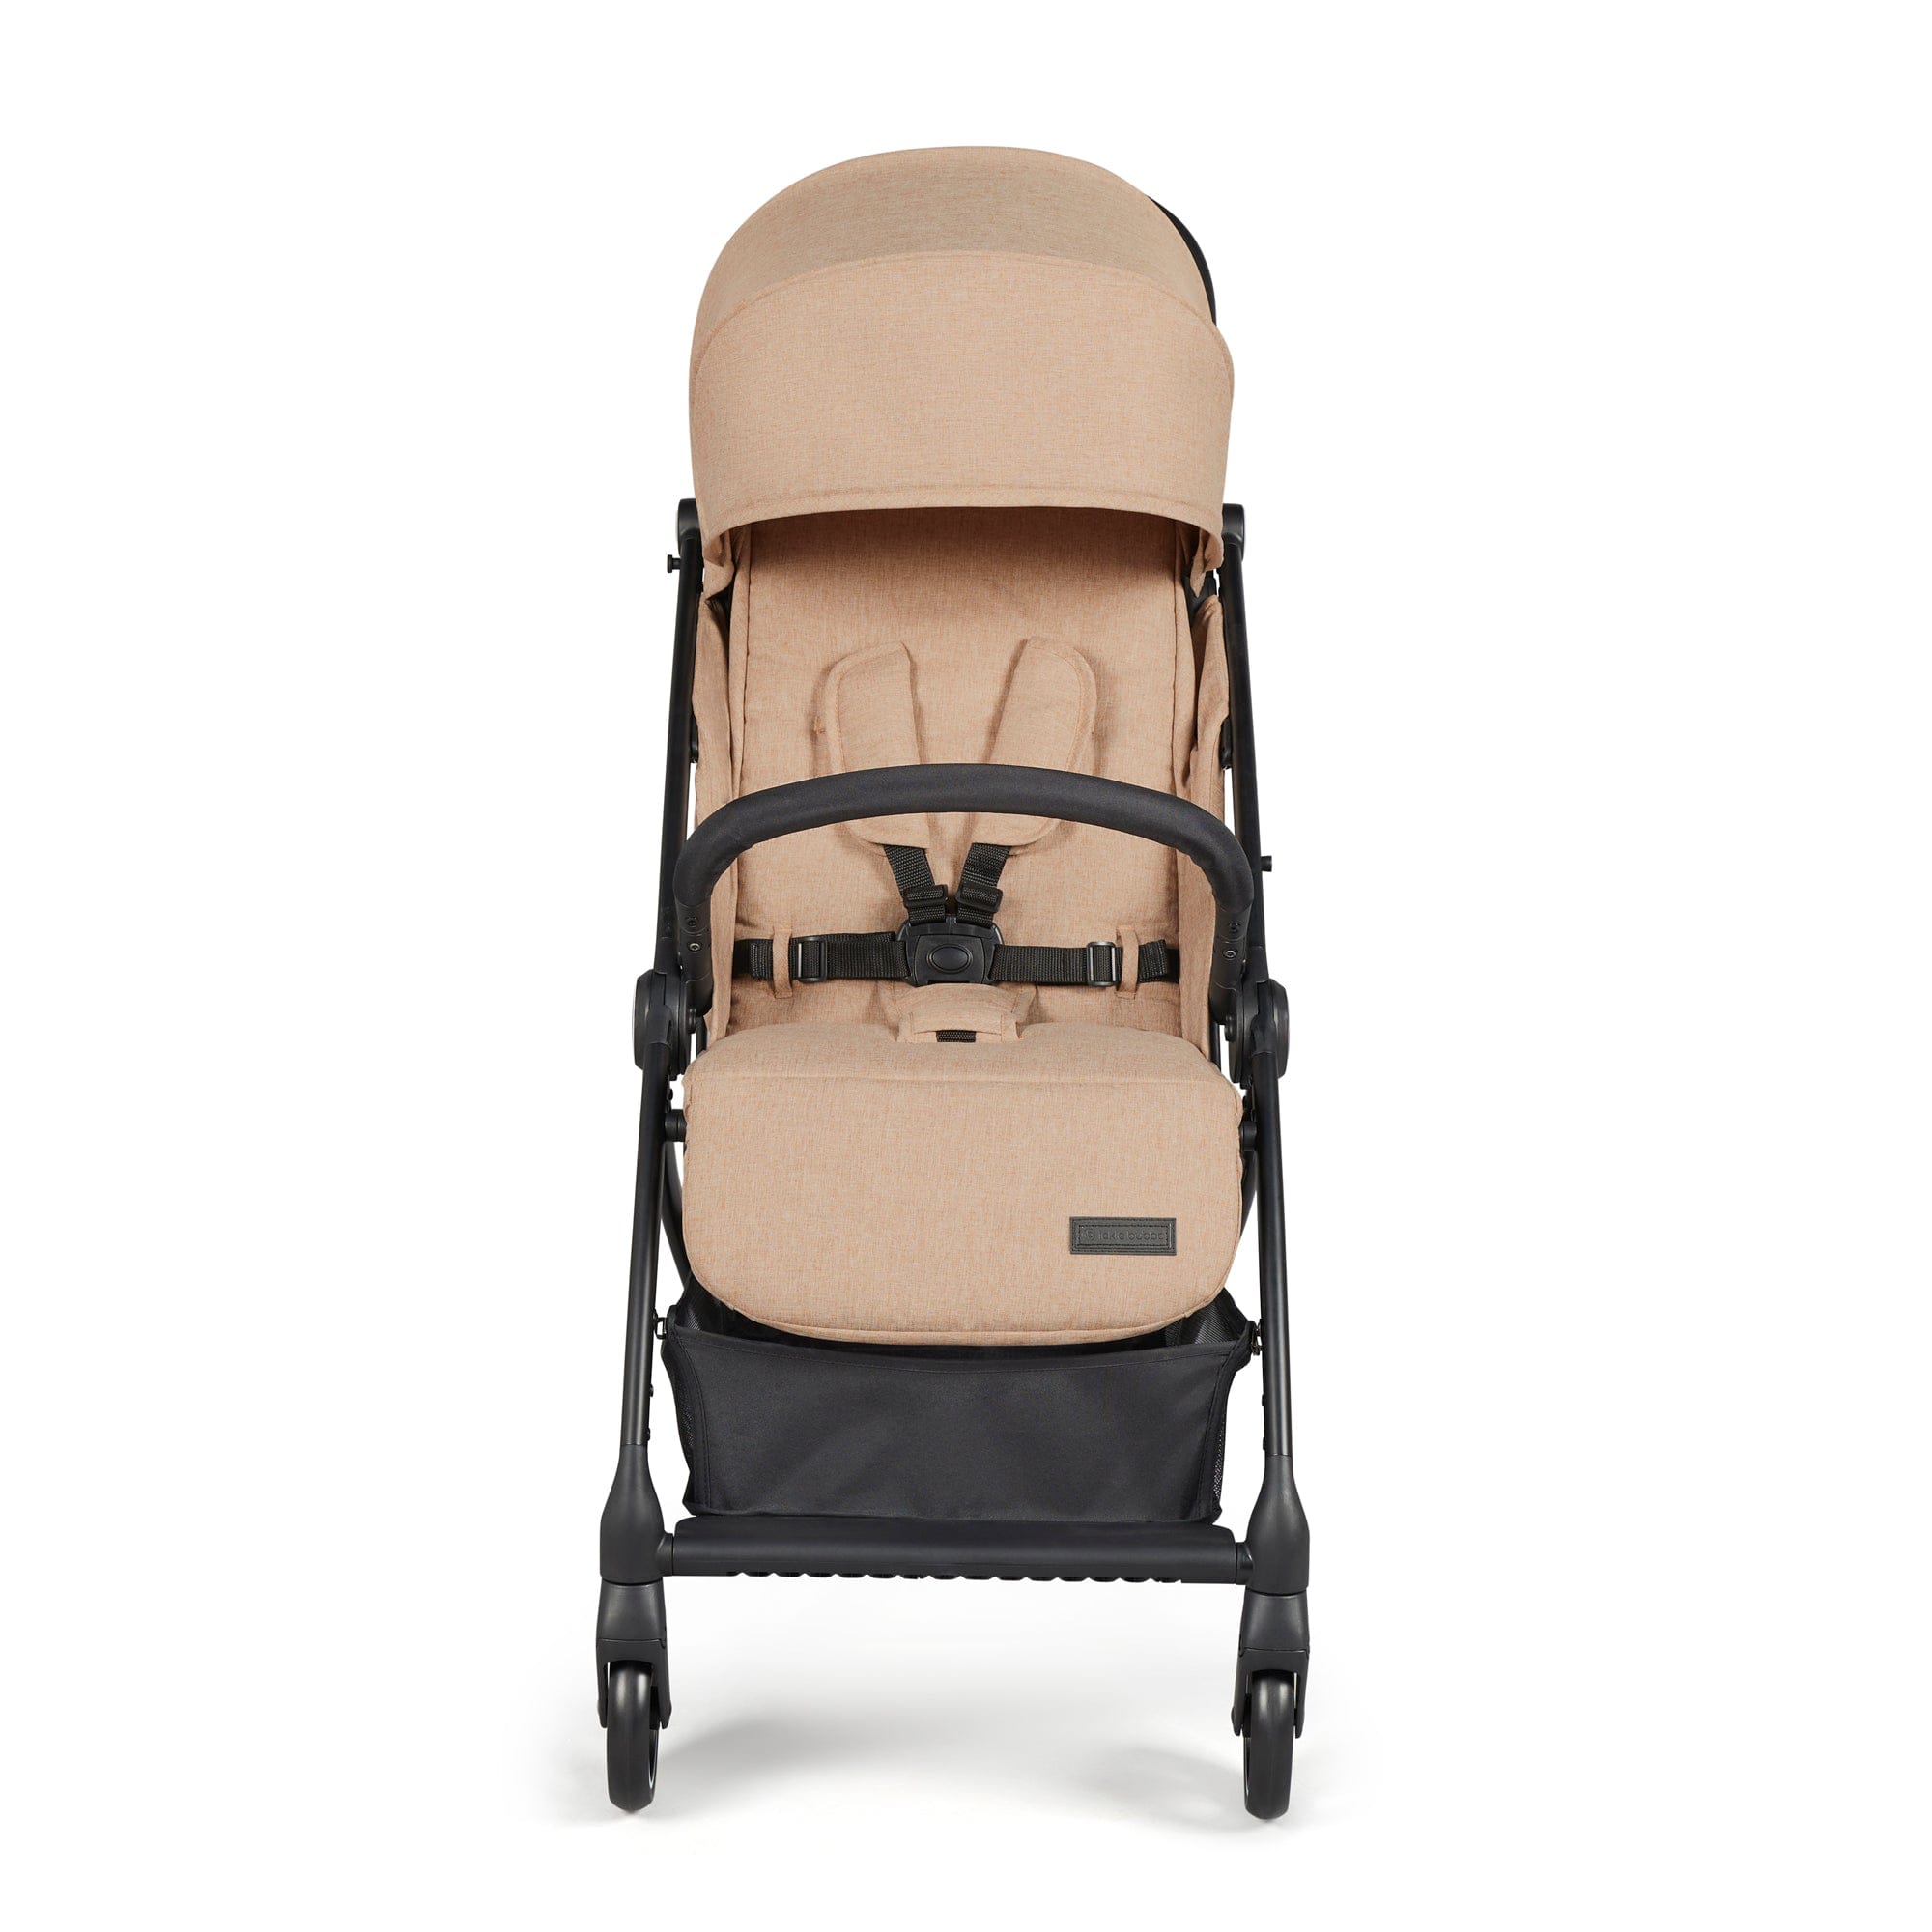 Ickle Bubba Aries Max Autofold Stroller in Biscuit Pushchairs & Buggies 15-005-200-157 5056515031287